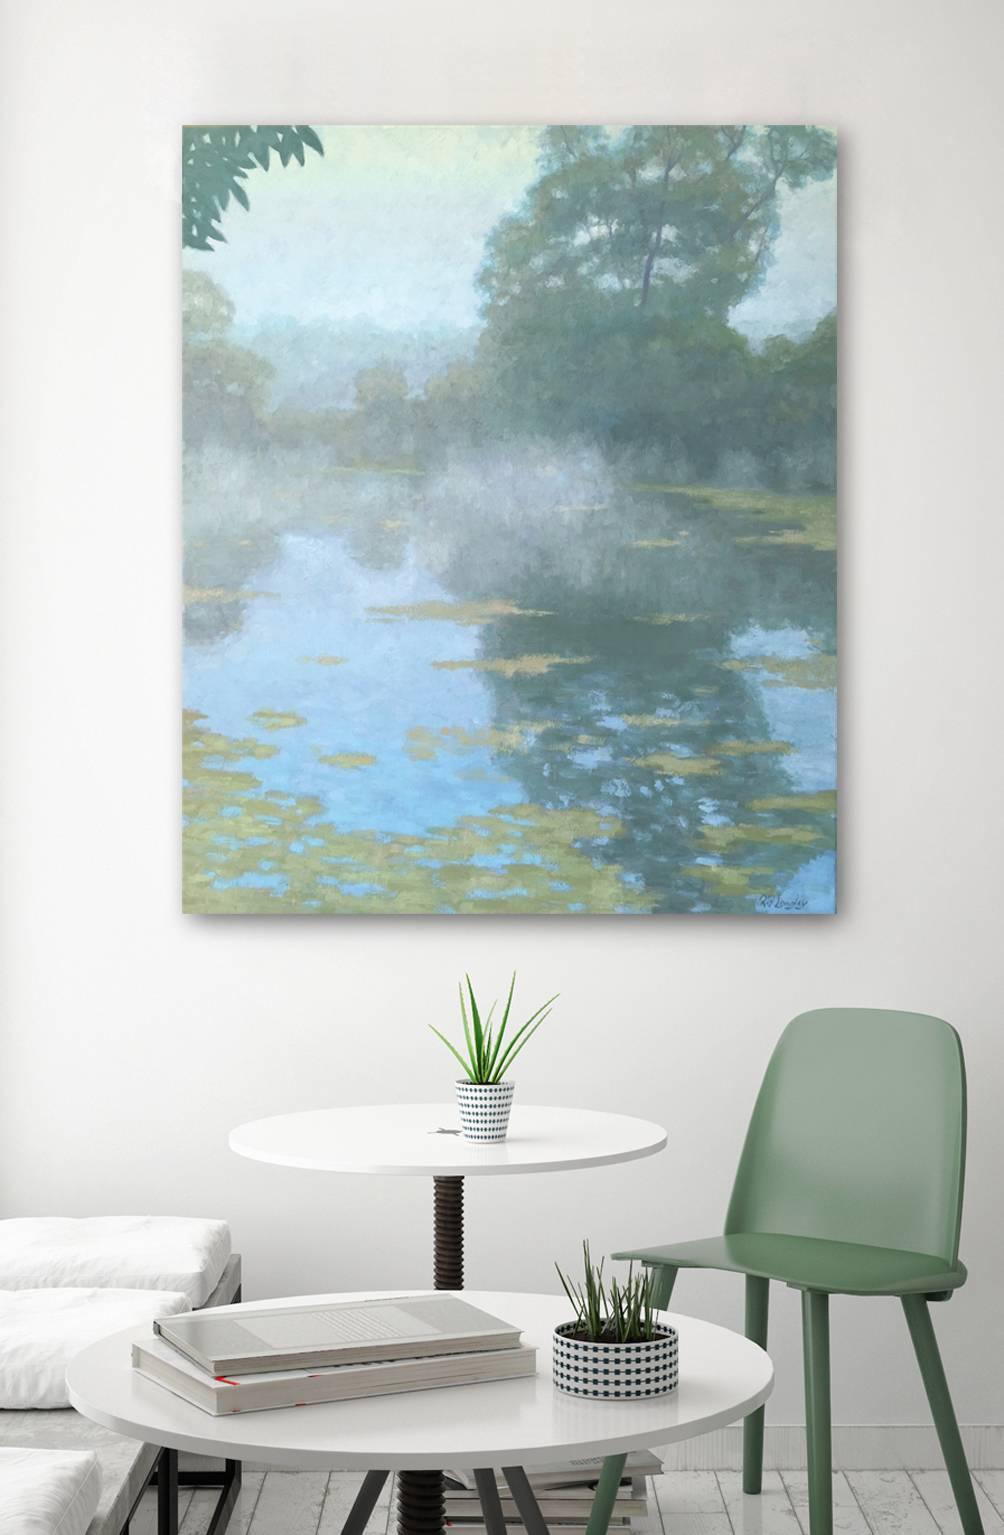 Nature, river, water, forest, trees, mist, fog, monochromic colors blue and green. Akin to Claude Monet water lilies.

Rob Longley's training as an artist began when he first studied painting with Dick Goetz at the Malden Bridge School of Art in